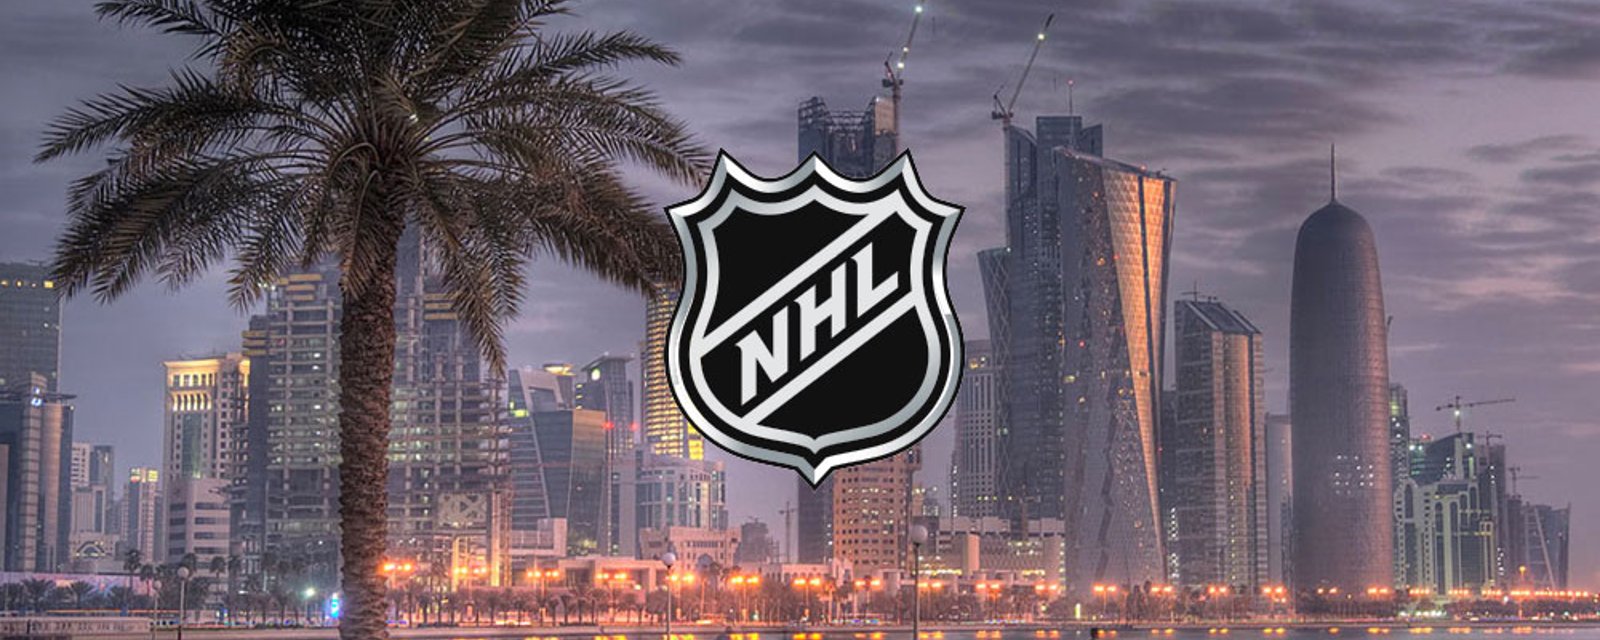 Qatar based investor now owns stake in NHL team